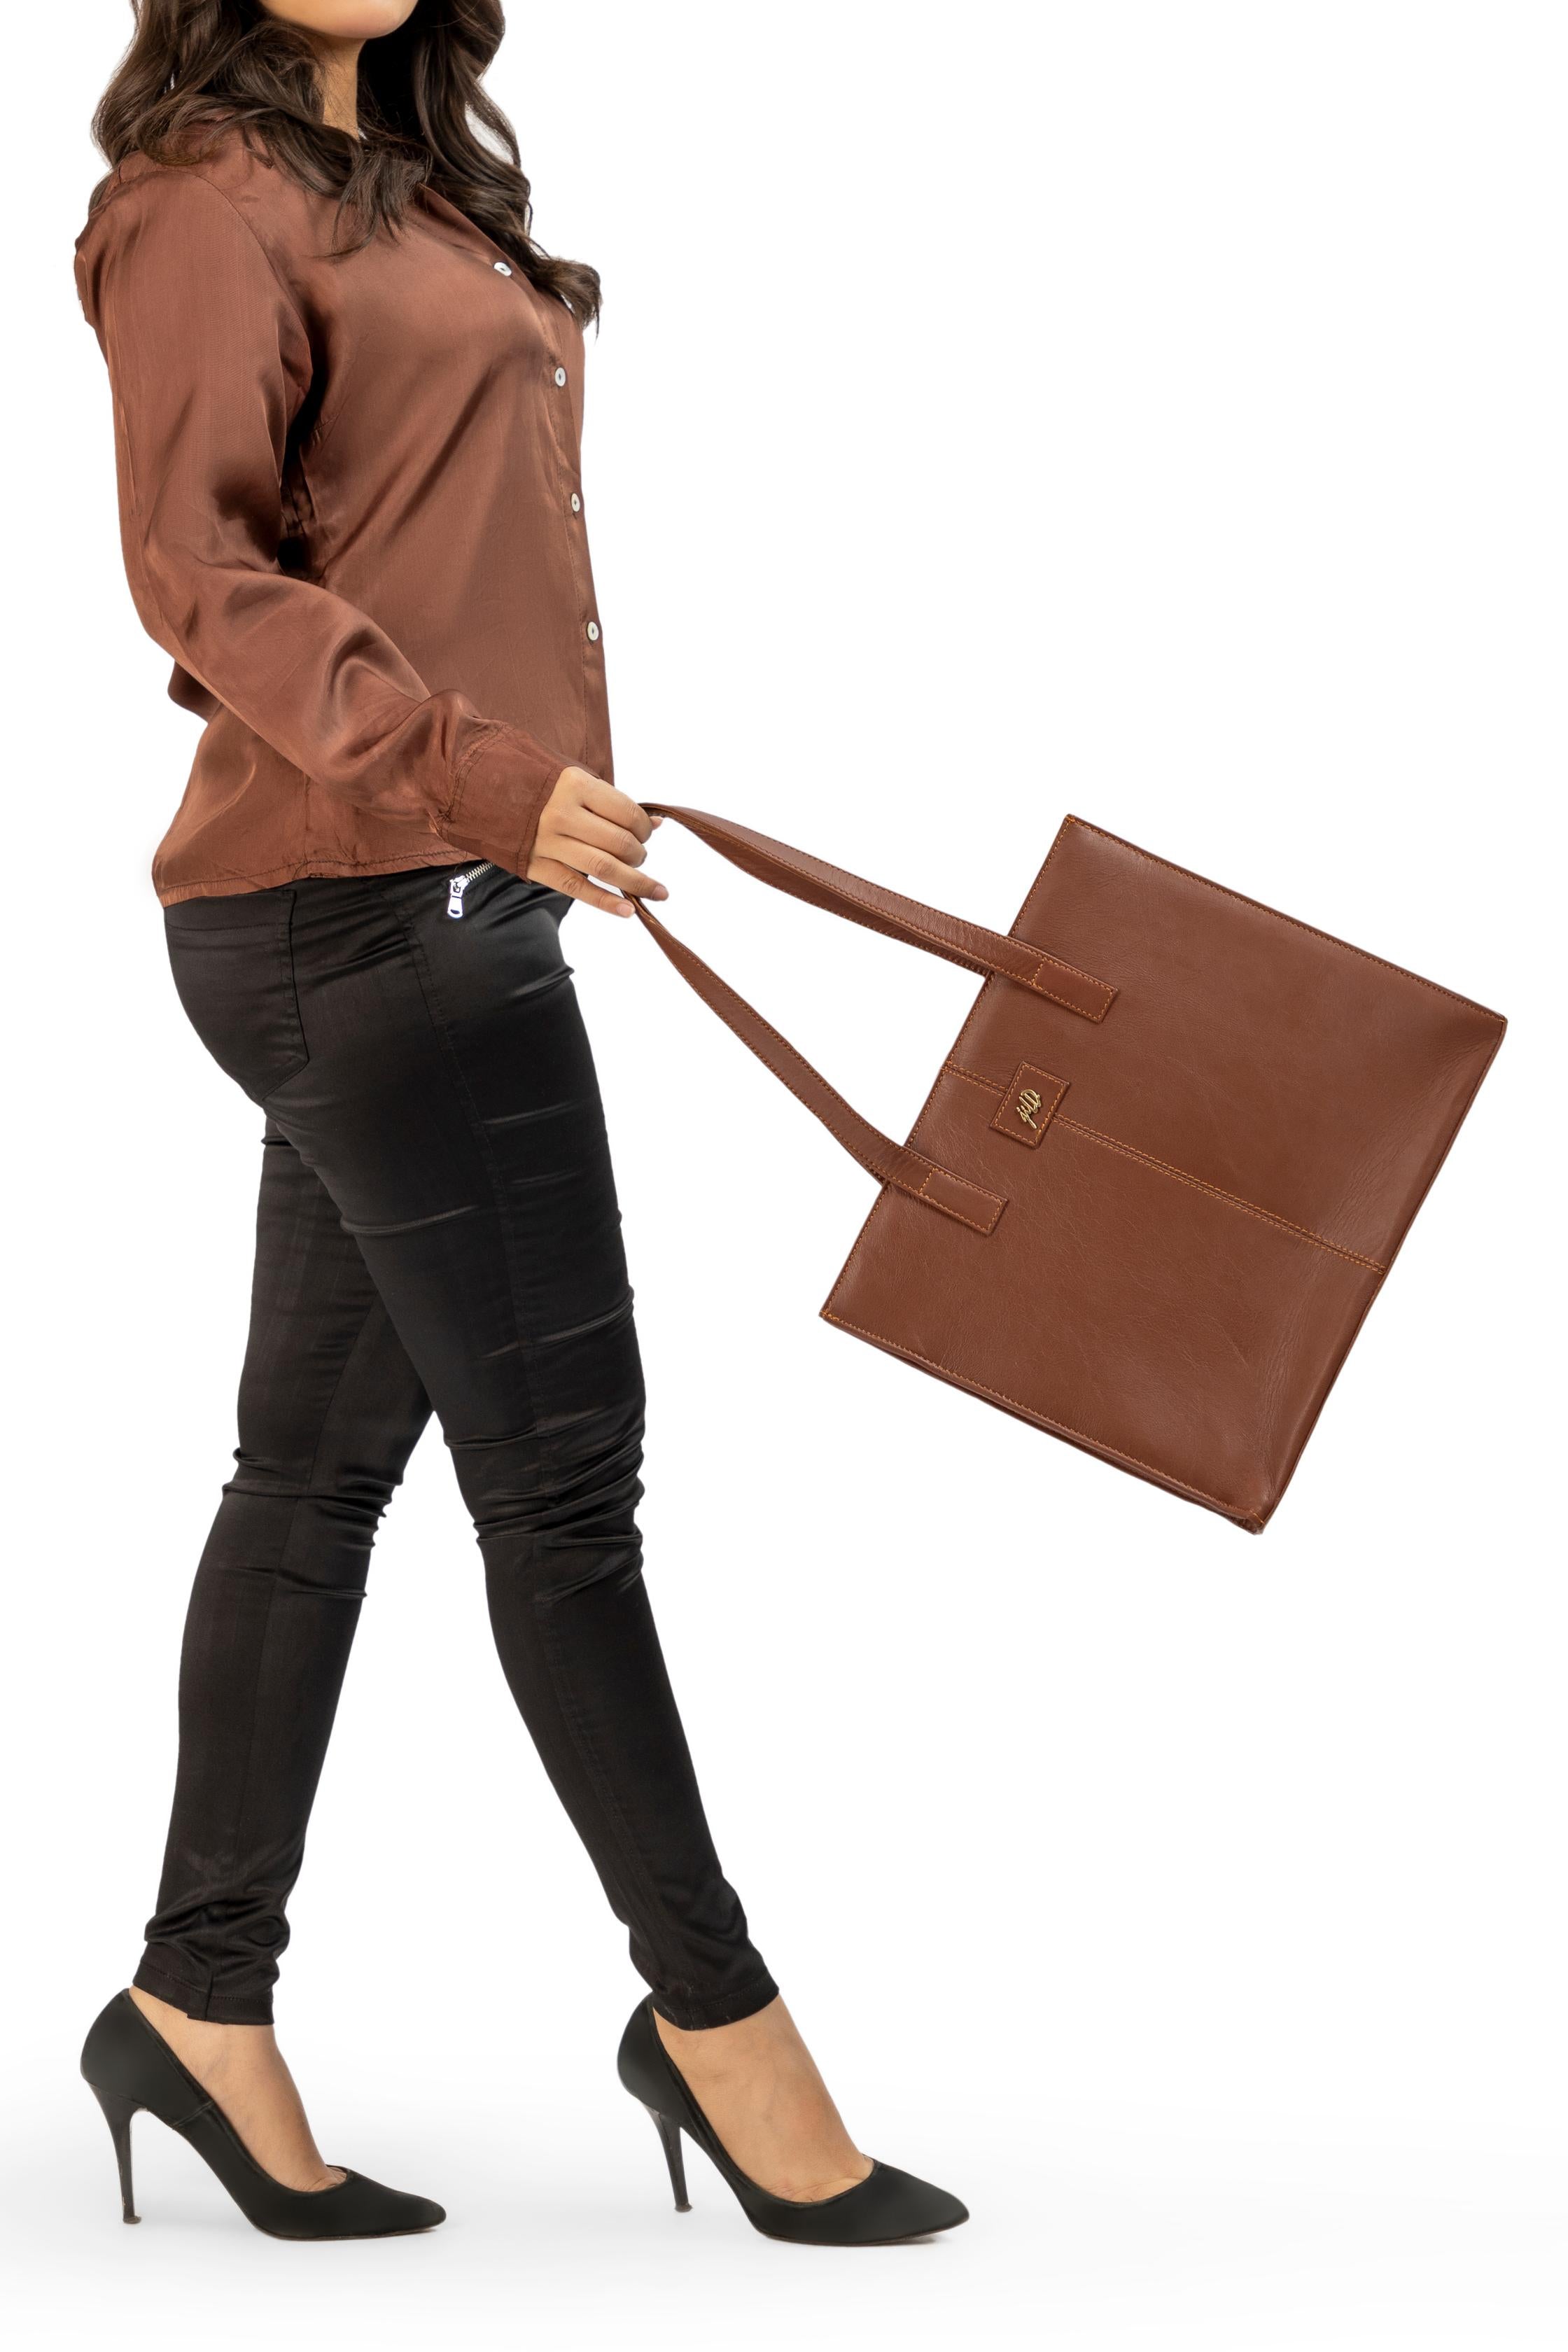 Everyday Women's Leather  Zipper Tote Bag-Tan Brown